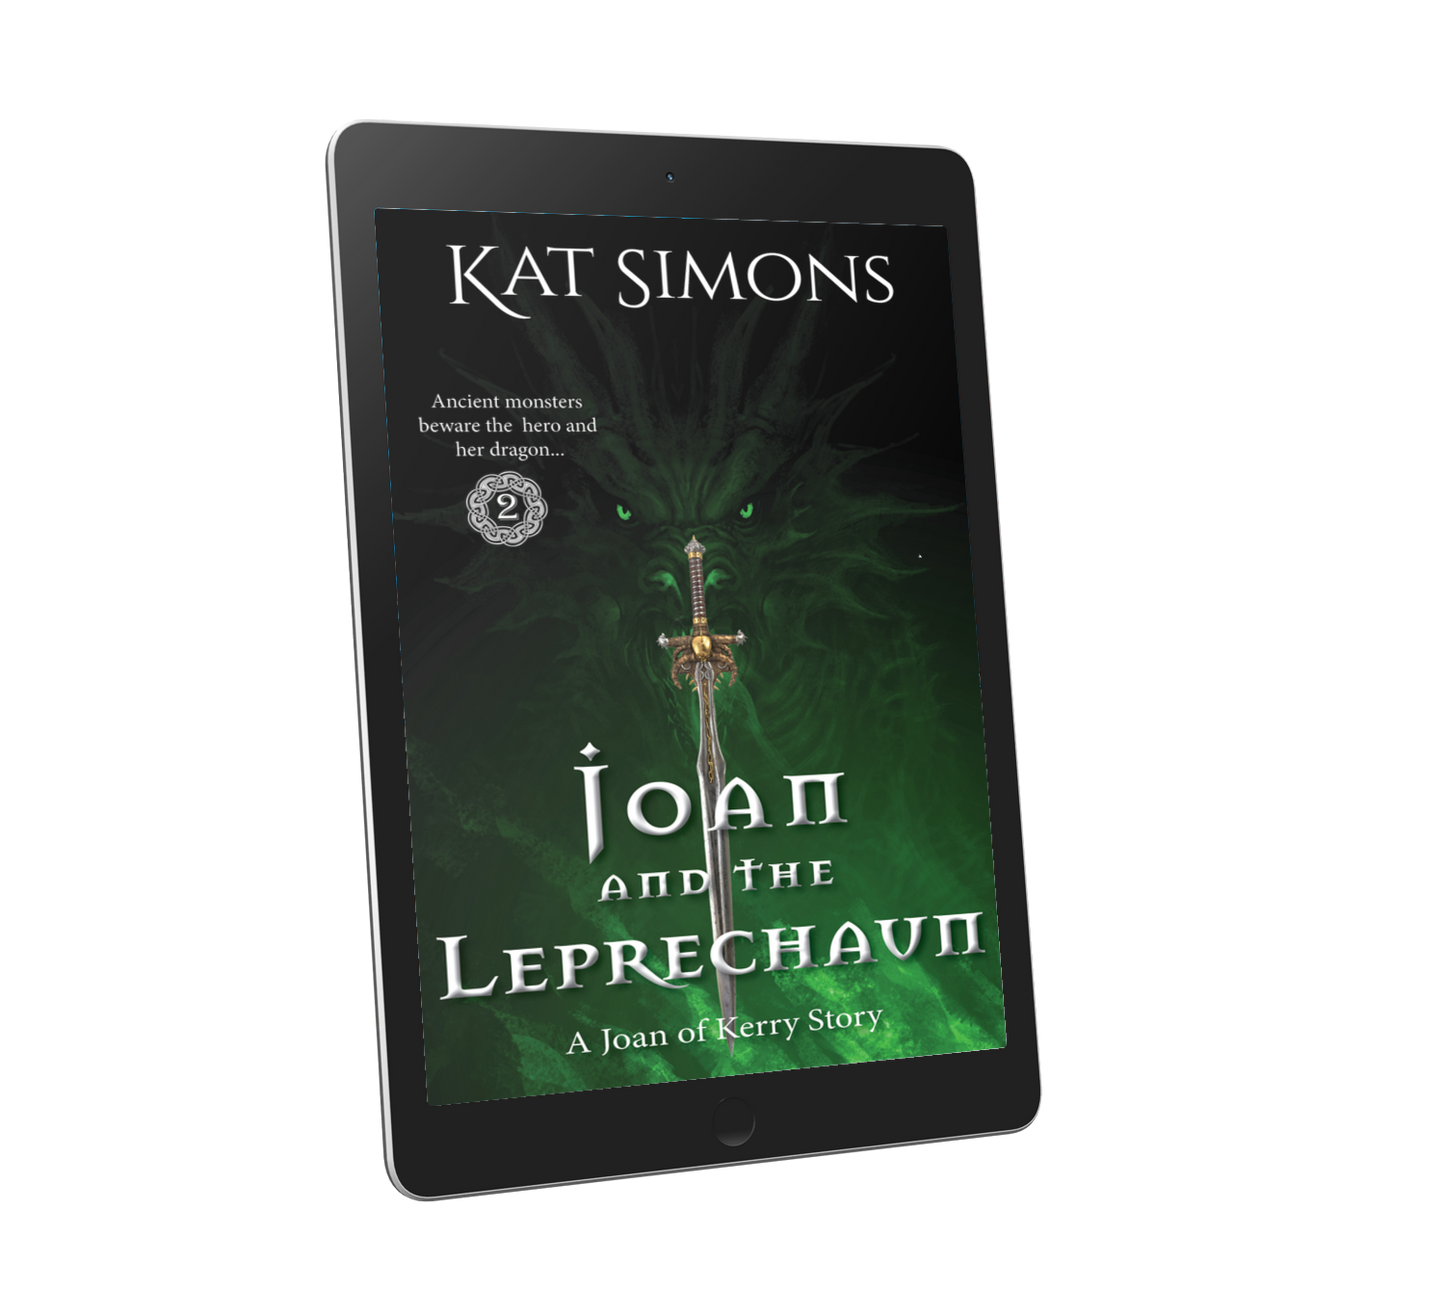 Joan and the Leprechaun: A Joan of Kerry Story